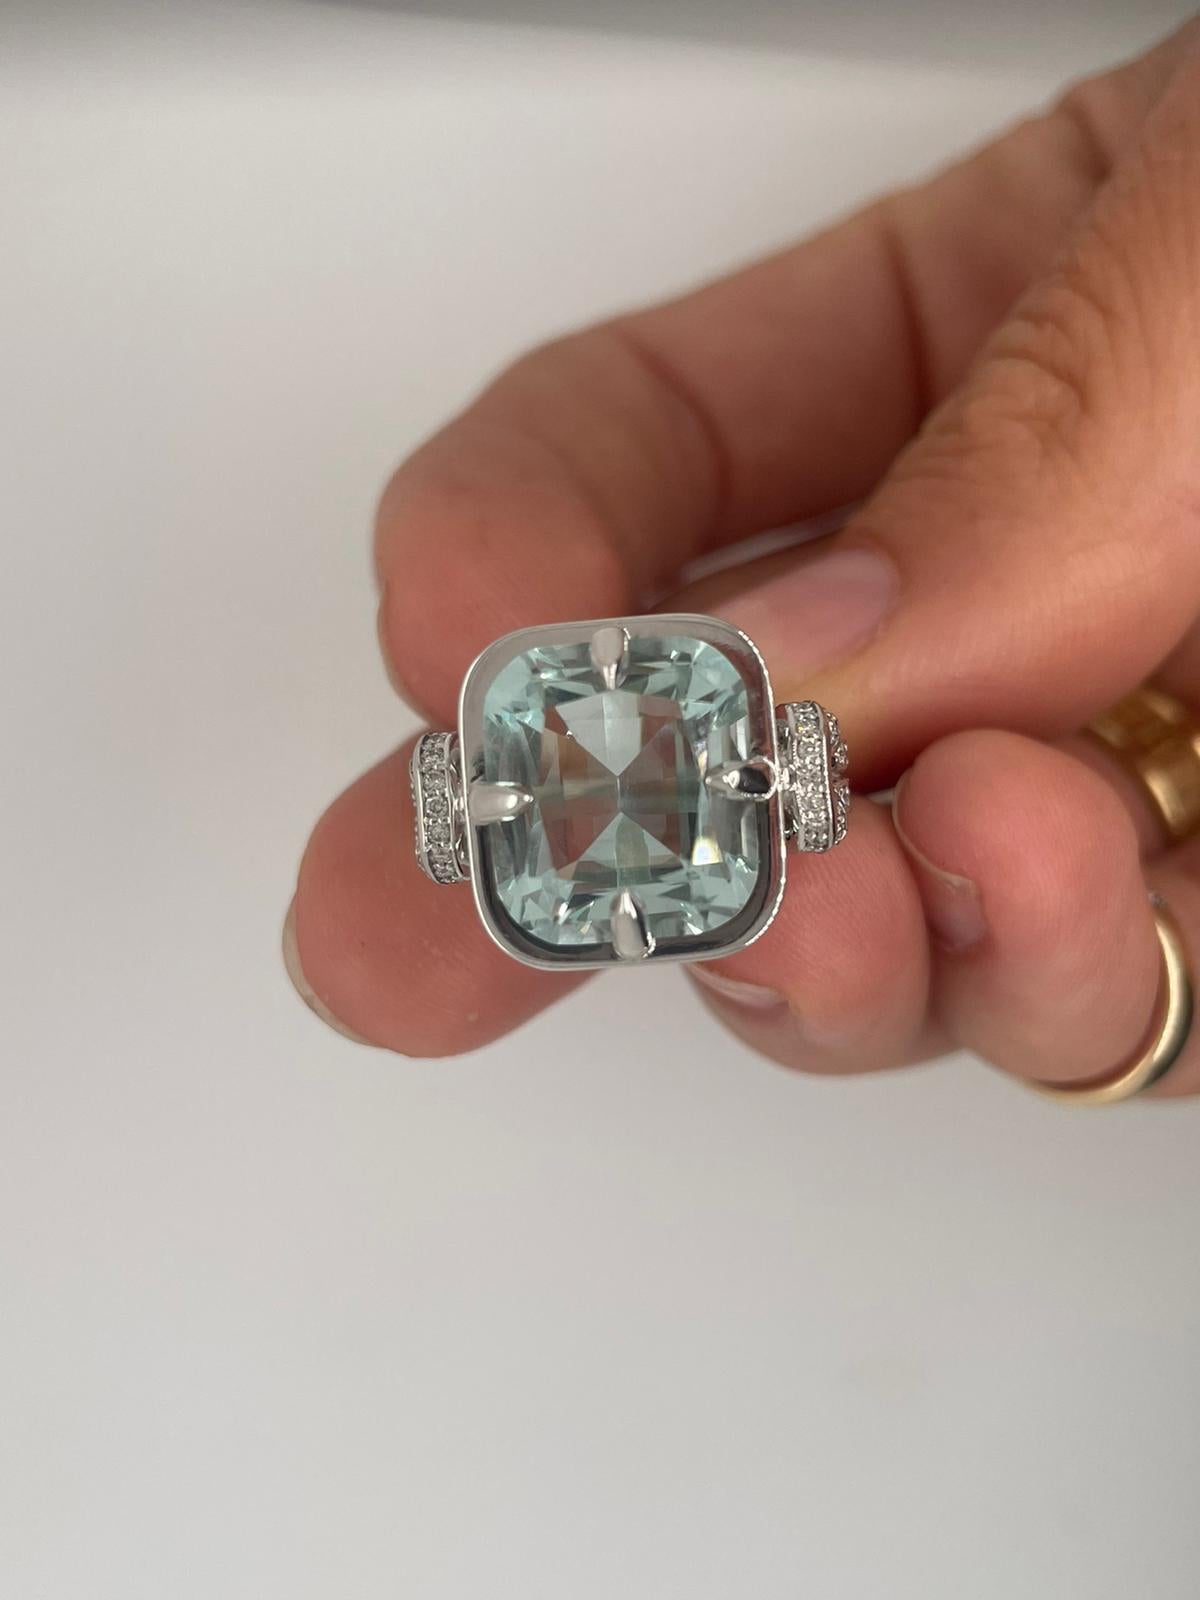 For Sale:  6ct Cushion Cut Aquamarine and Diamond Reef Knot Ring 9